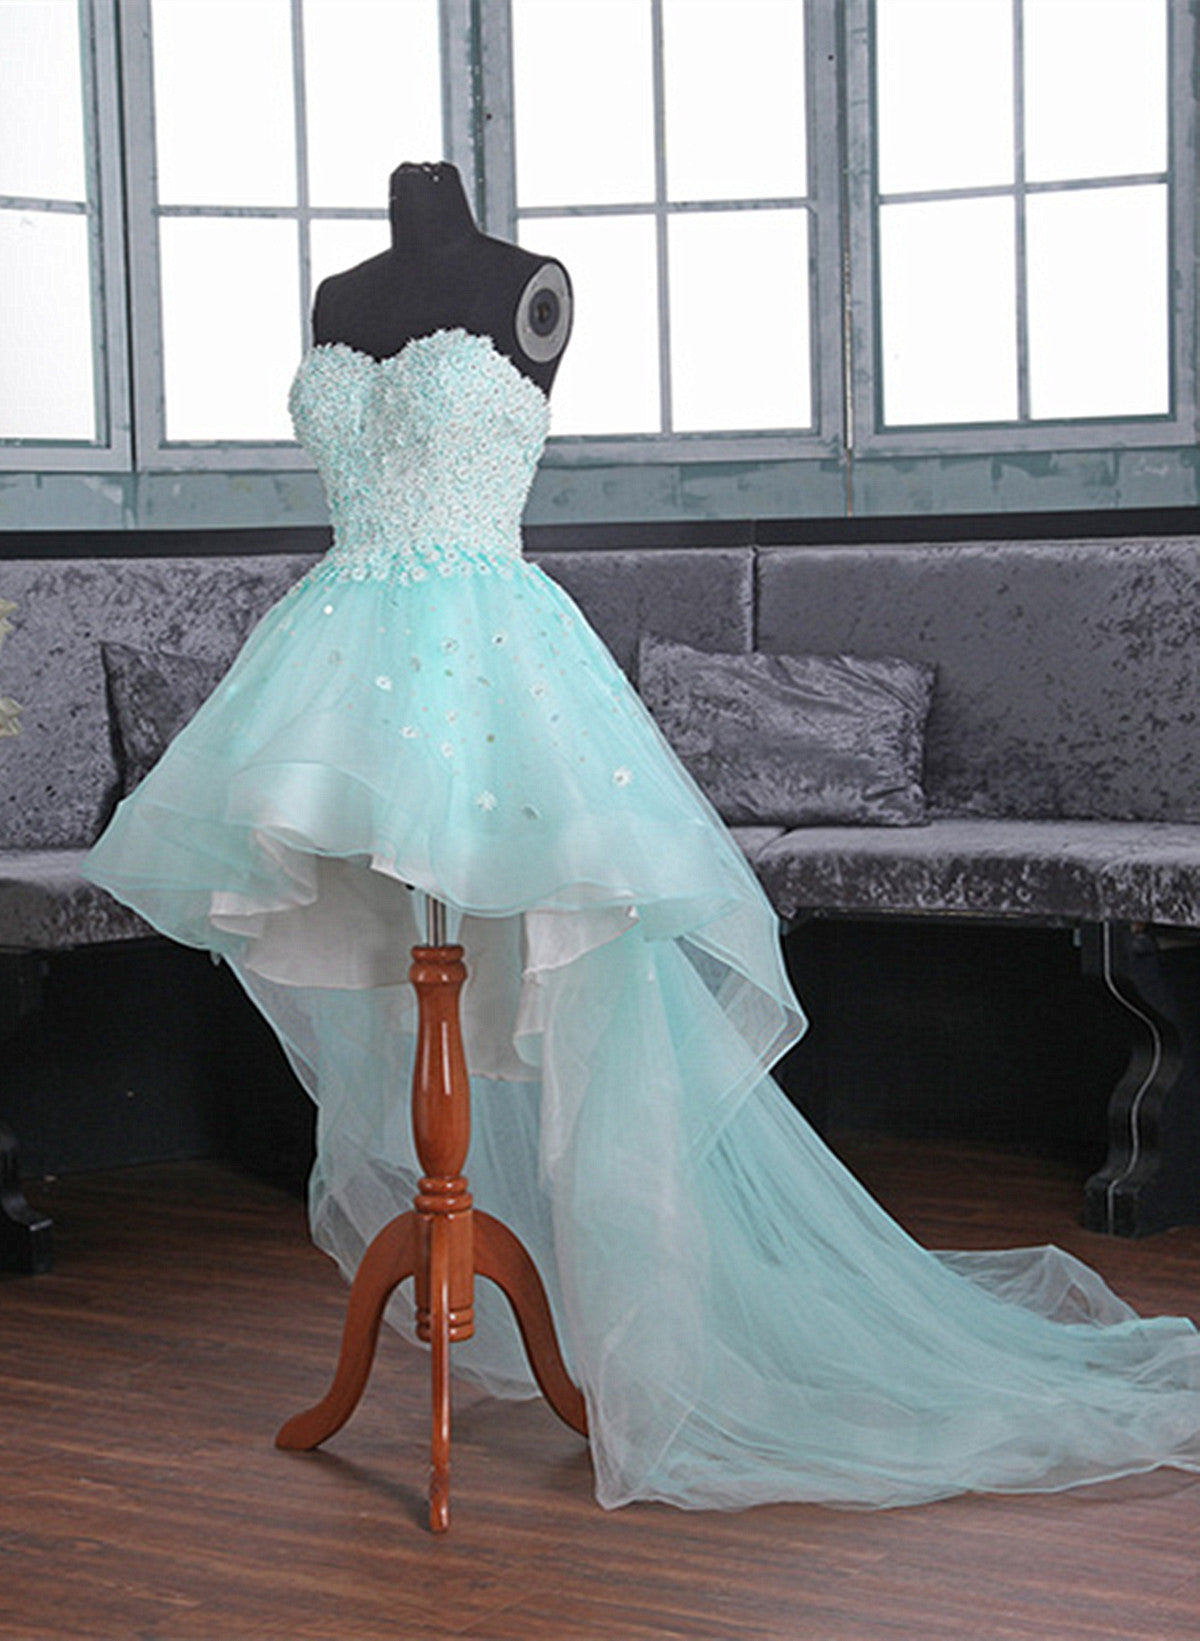 Light Blue Sweetheart Lace Applique High Low Party Dress Outfits For Girls, Blue Homecoming Dress